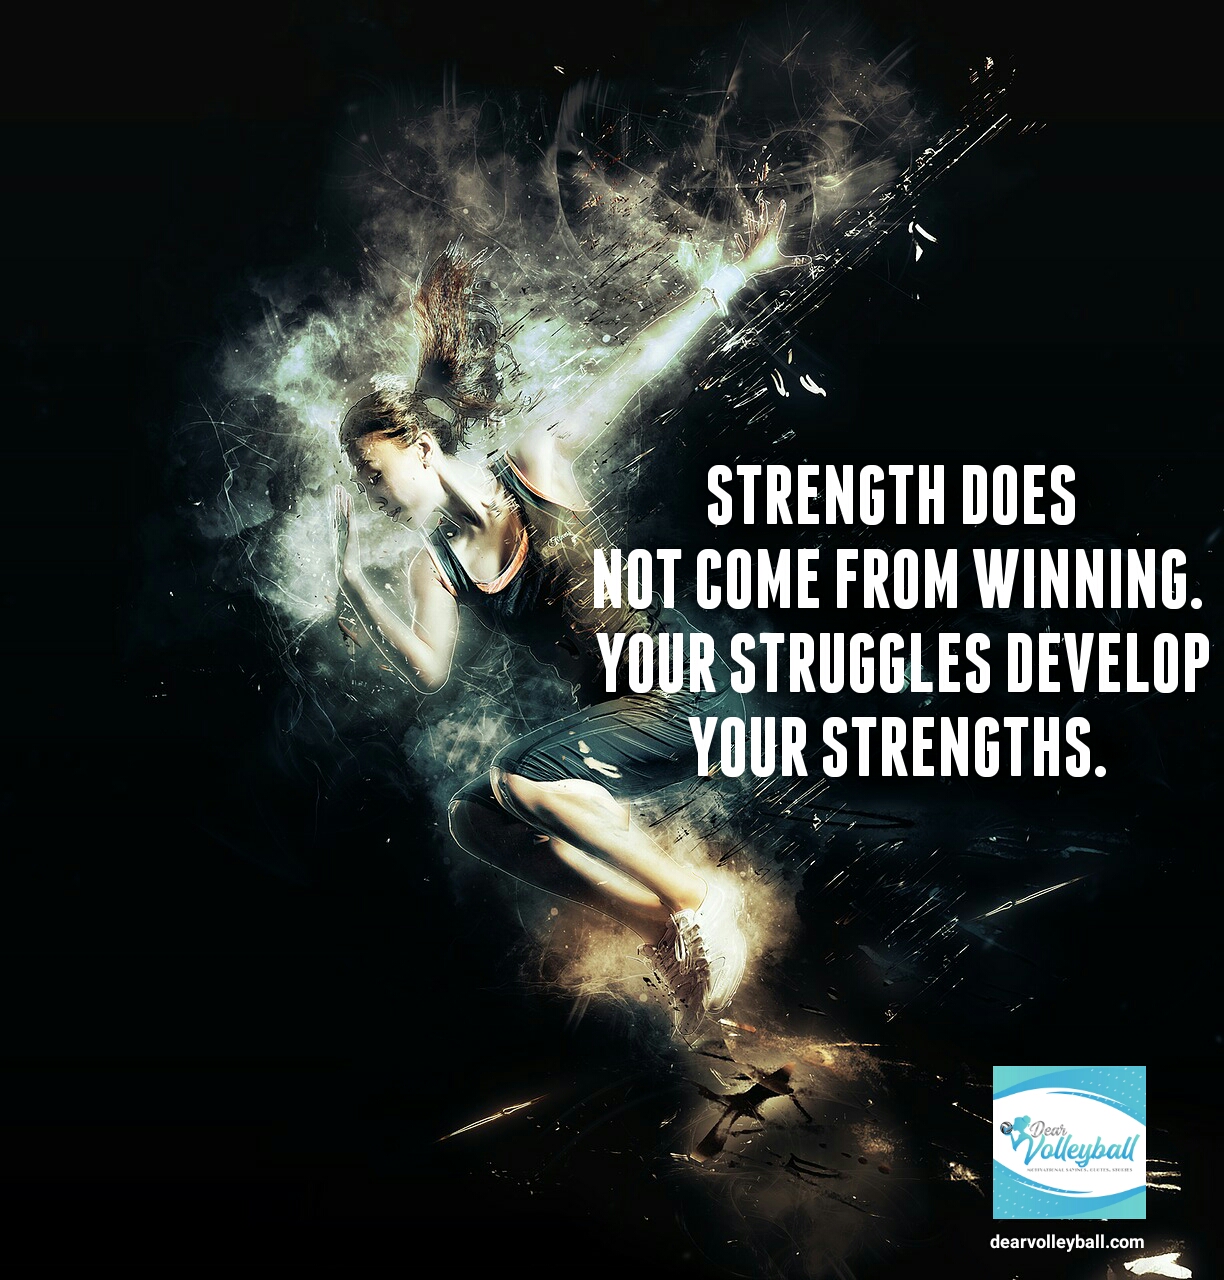 Strength does not come from winning. Your struggles develop your strengths and 75 other volleyball inspirational quotes on Dear Volleyball.com